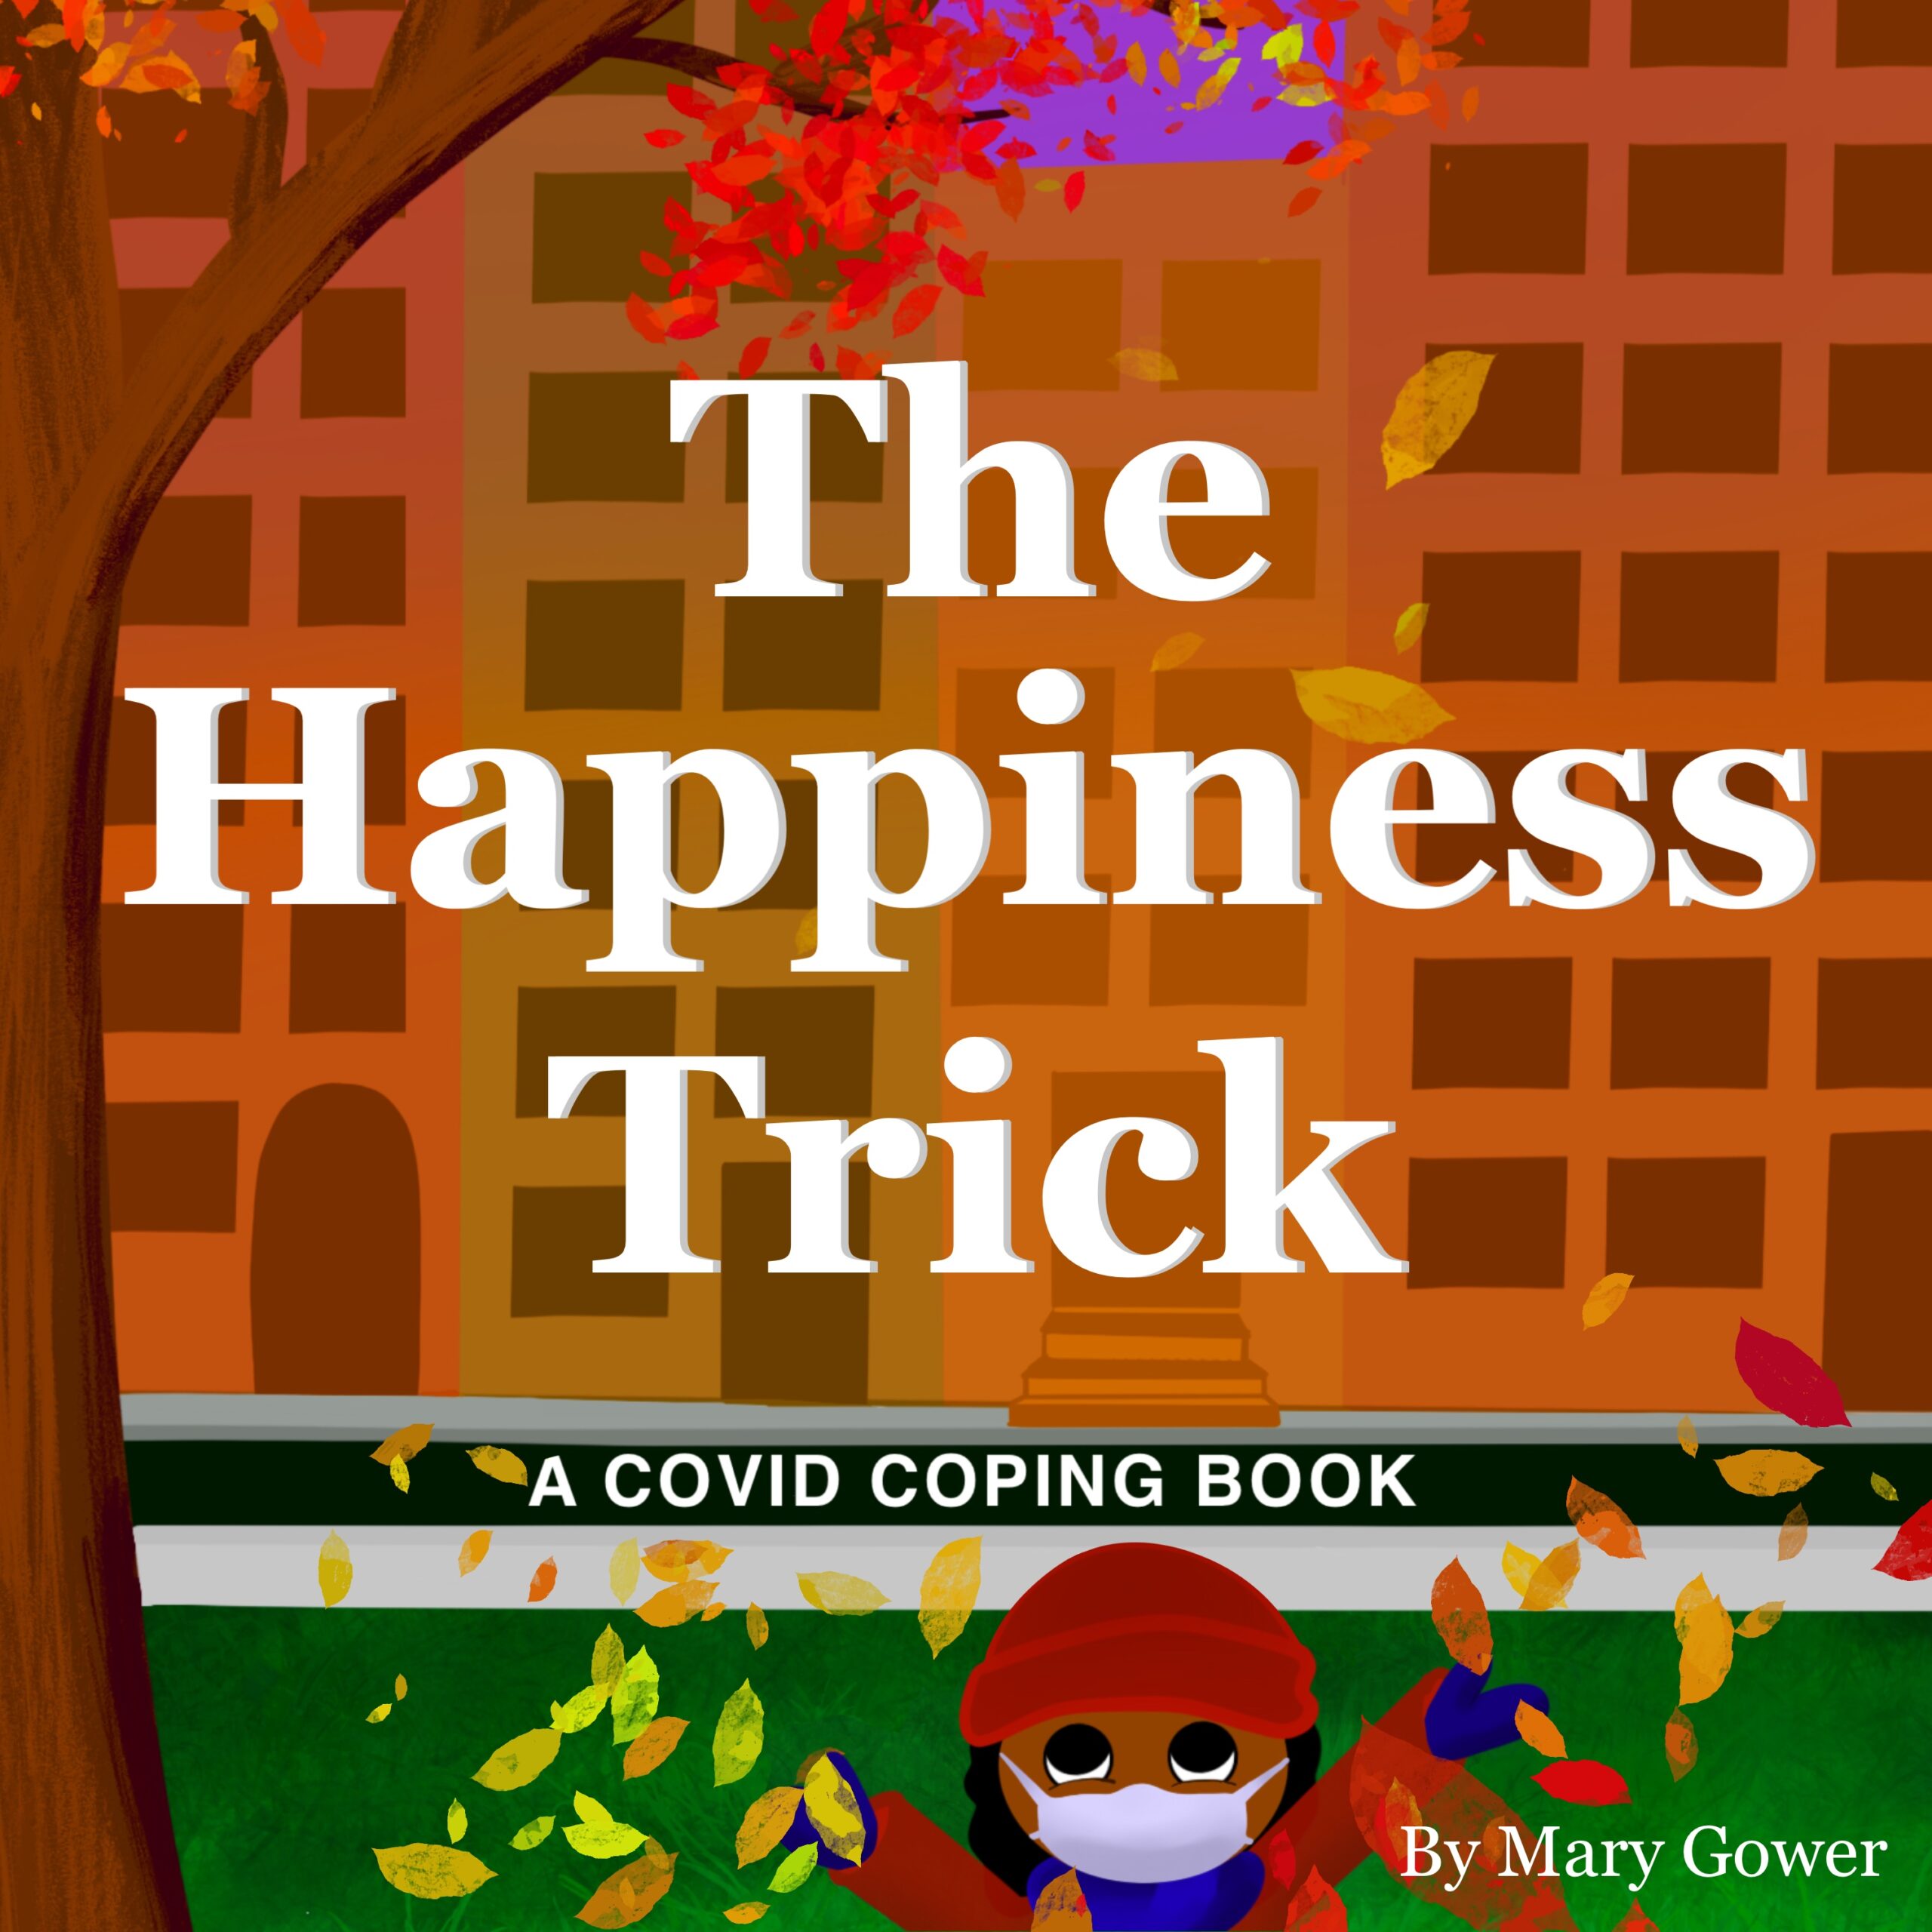 FREE: The Happiness Trick: A COVID Coping Book by Mary Gower by Mary Gower